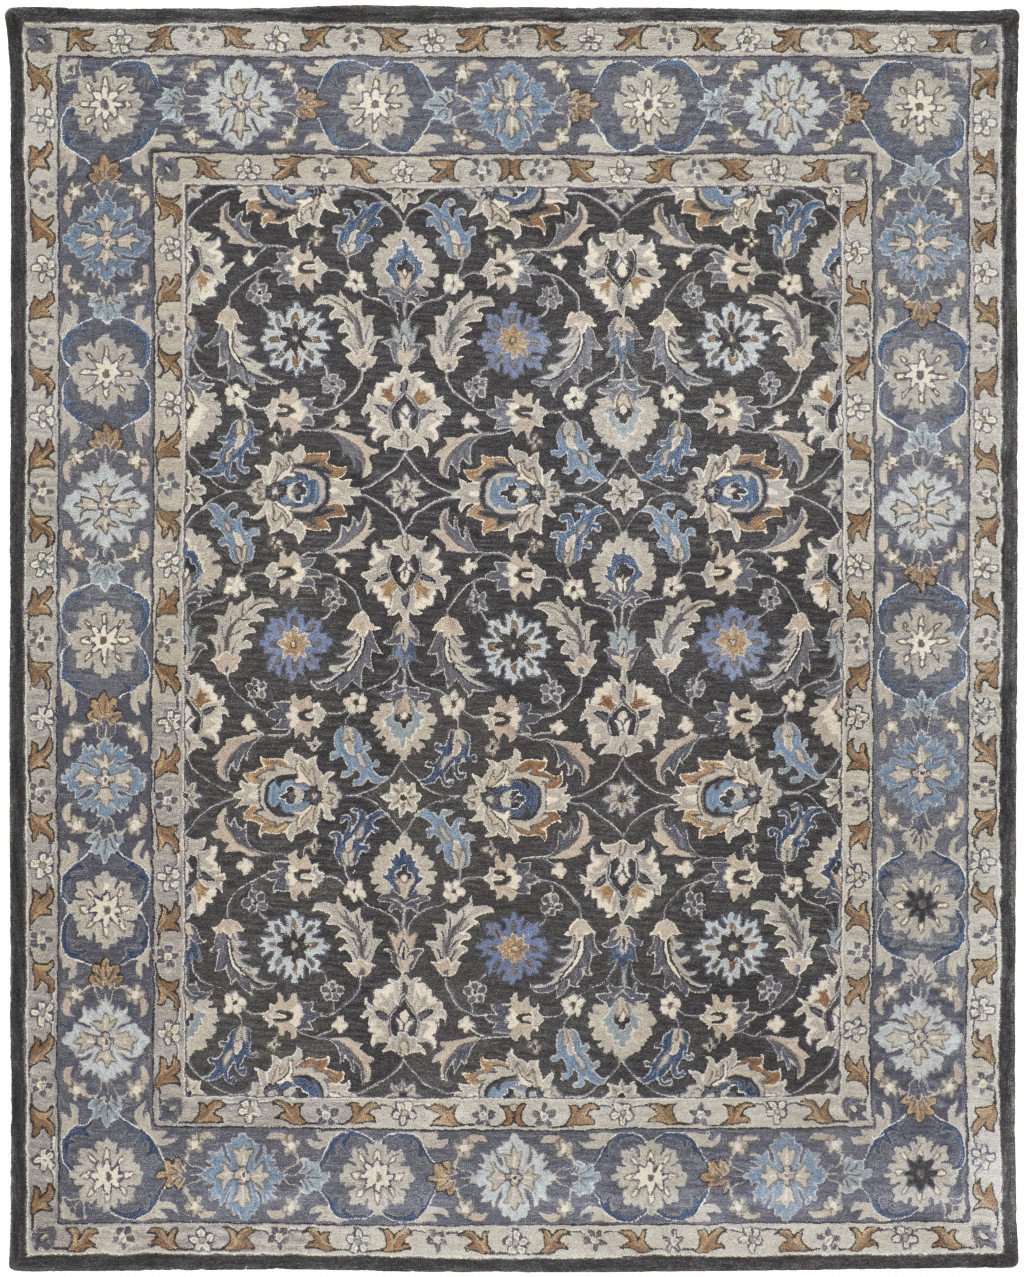 5' X 8' Taupe Blue And Ivory Wool Floral Tufted Handmade Stain Resistant Area Rug-514829-1